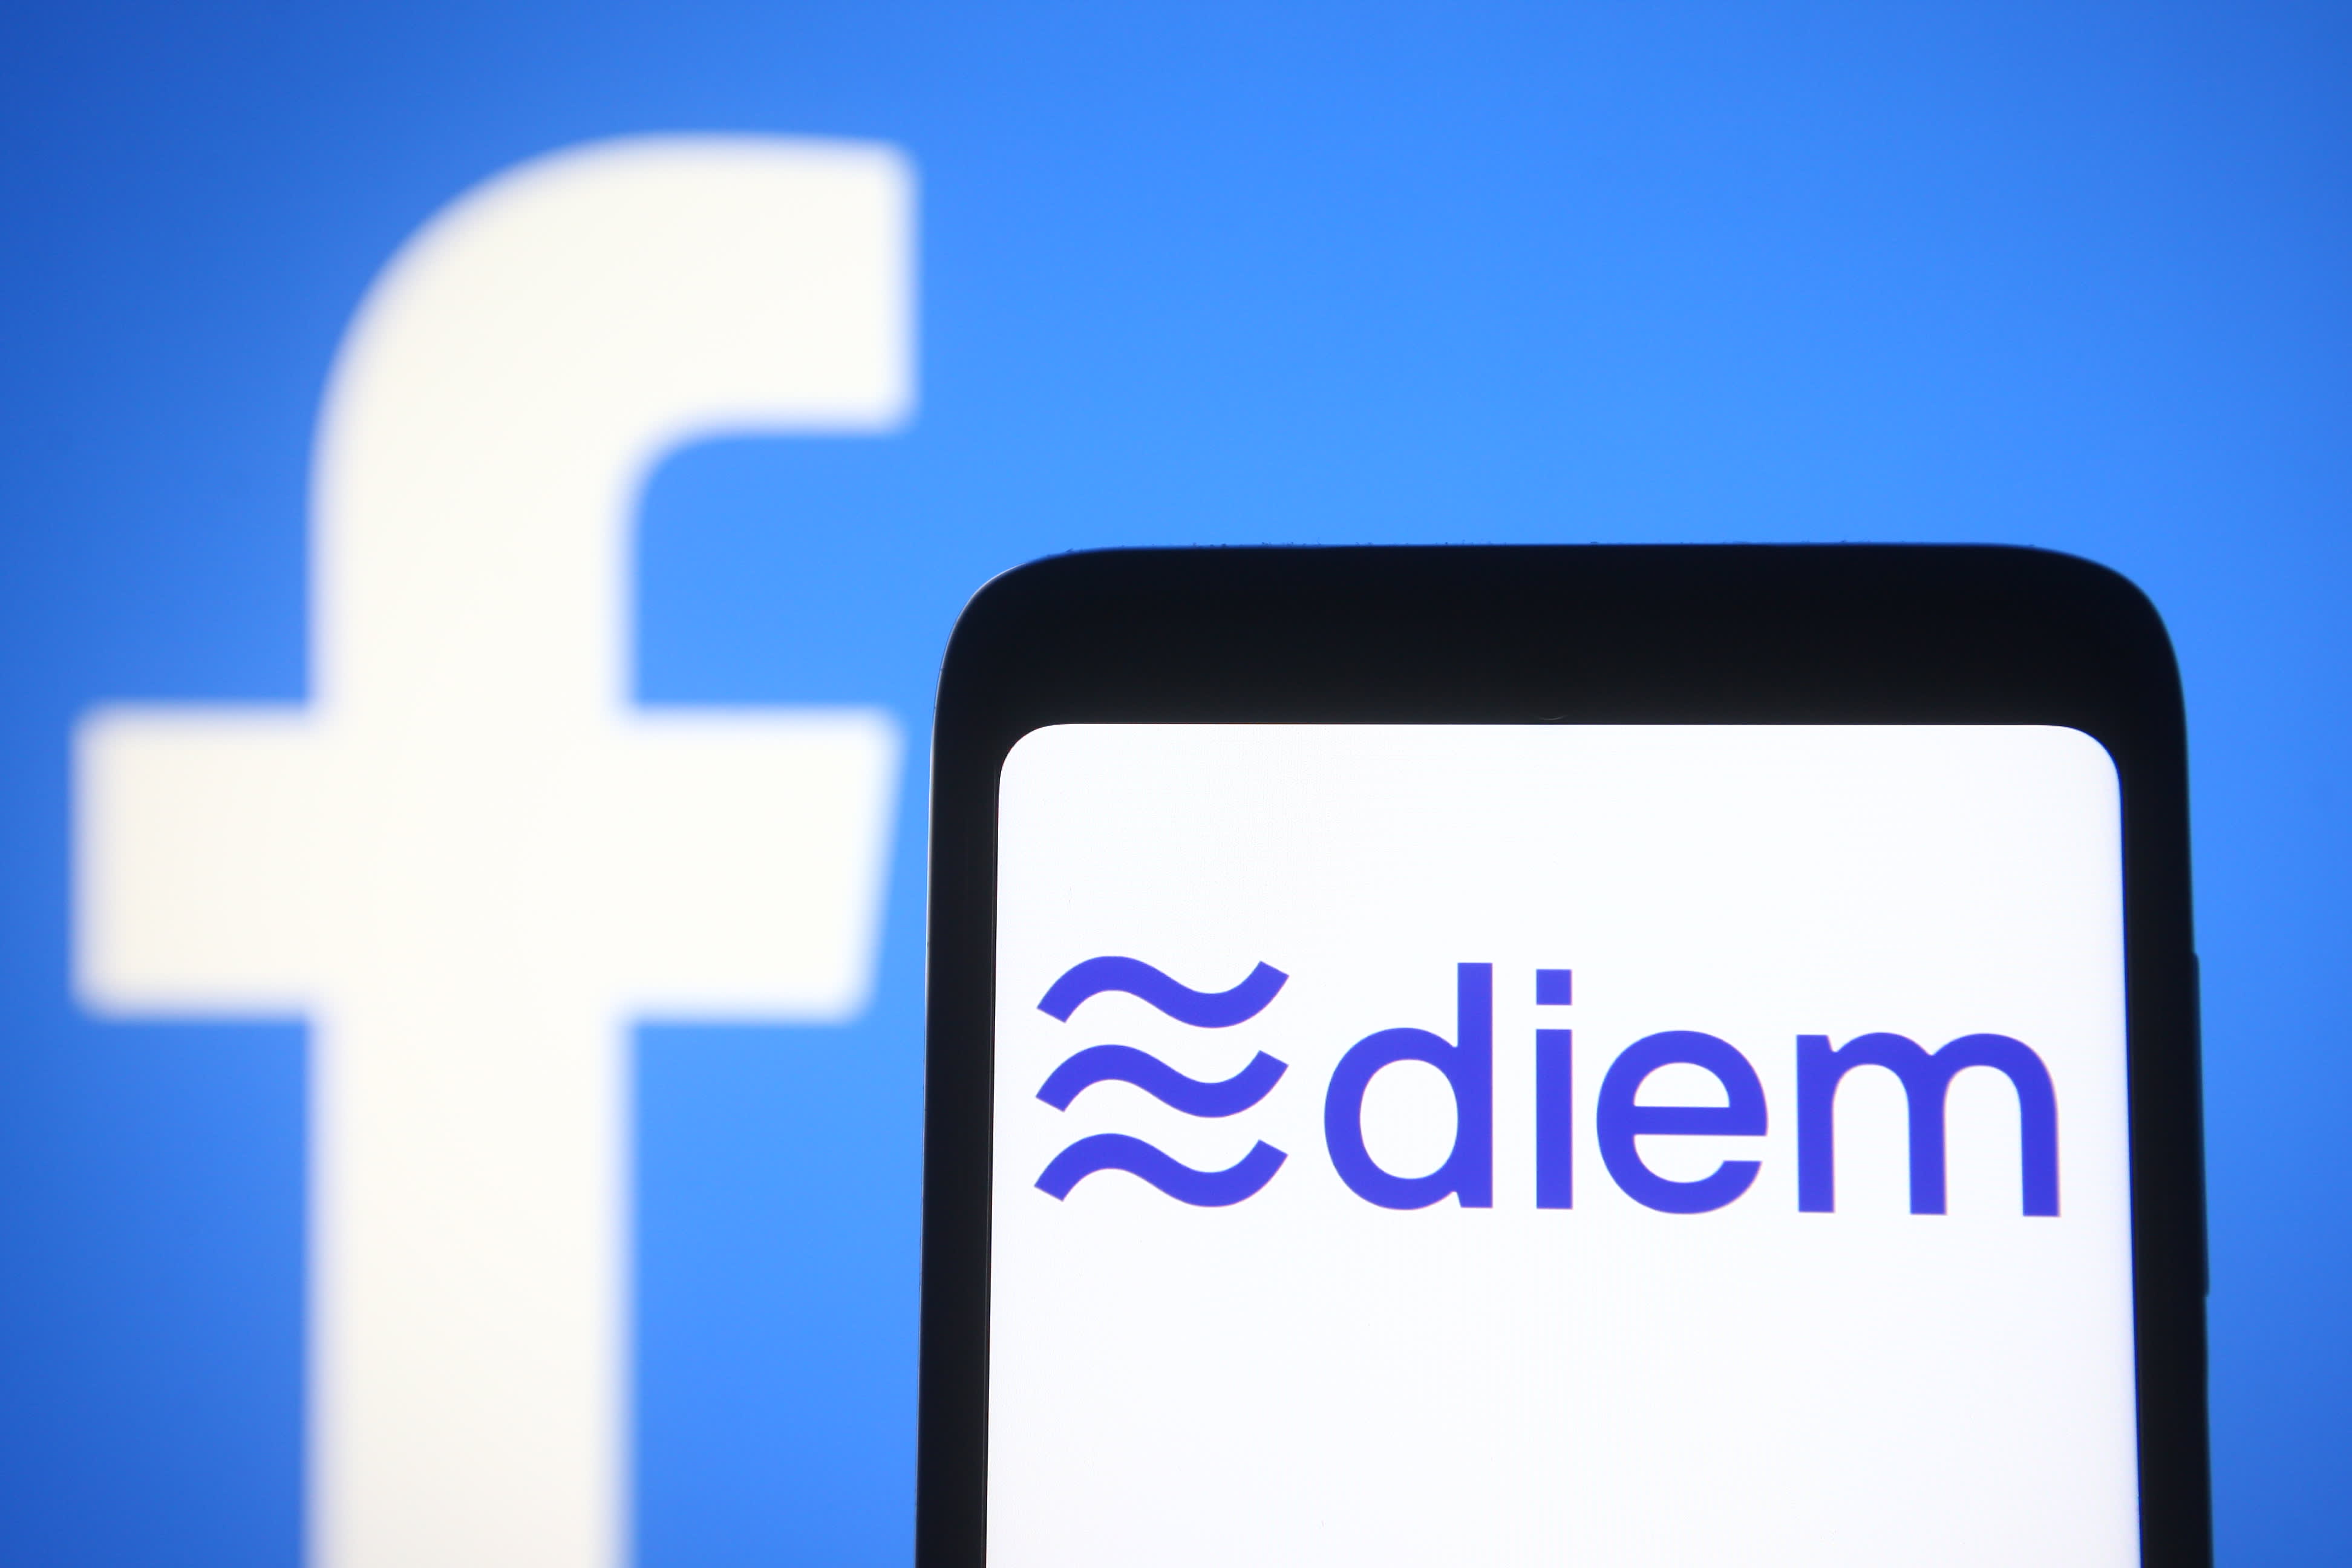 Facebook-backed Diem aims to launch digital currency pilot in 2021